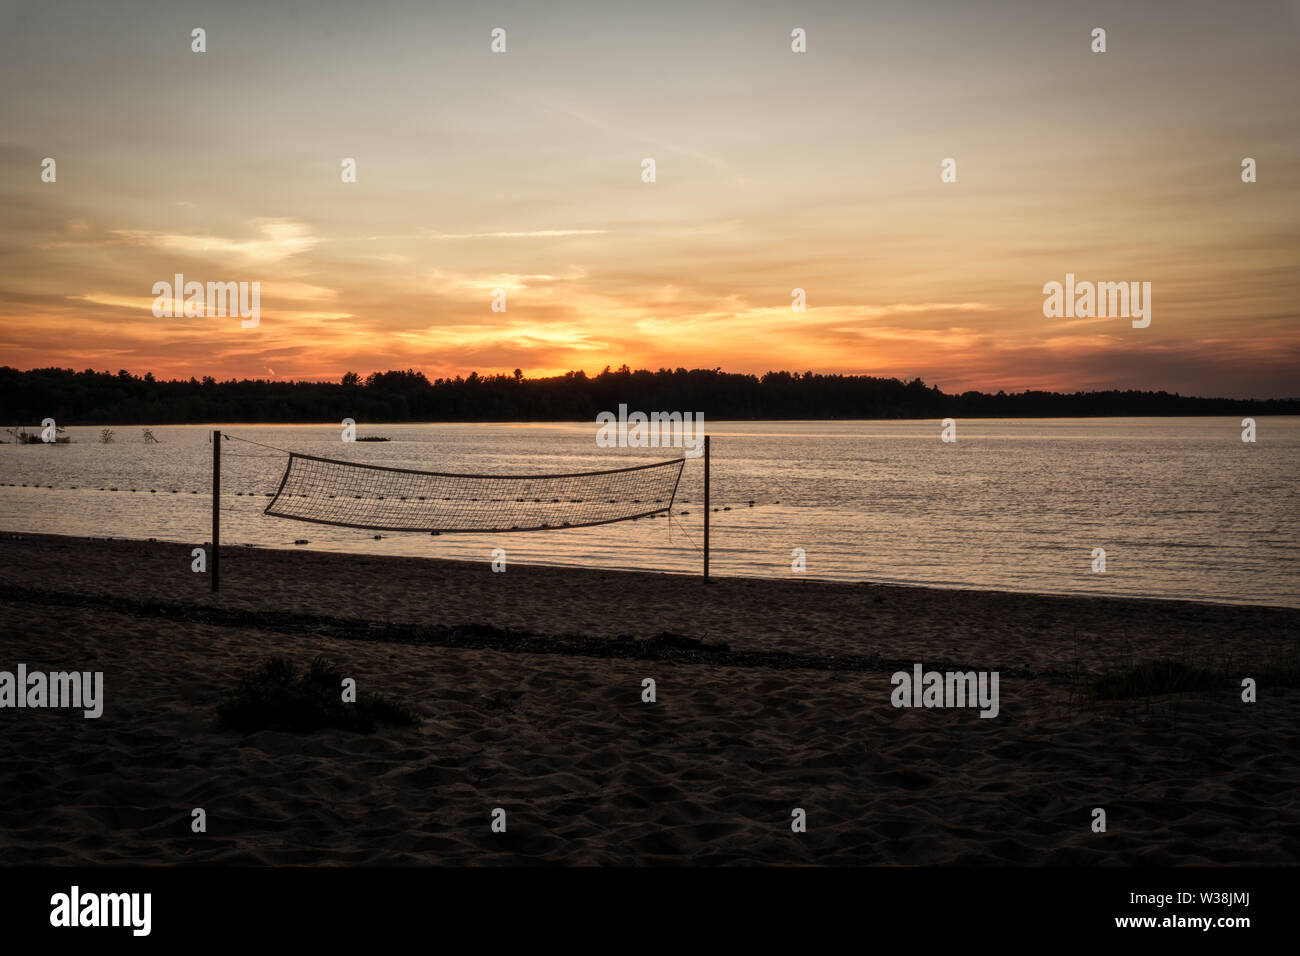 A beautiful sunset at Black Bear Beach, Canada, Petawawa, in the foreground a volleyball net, Stock Photo